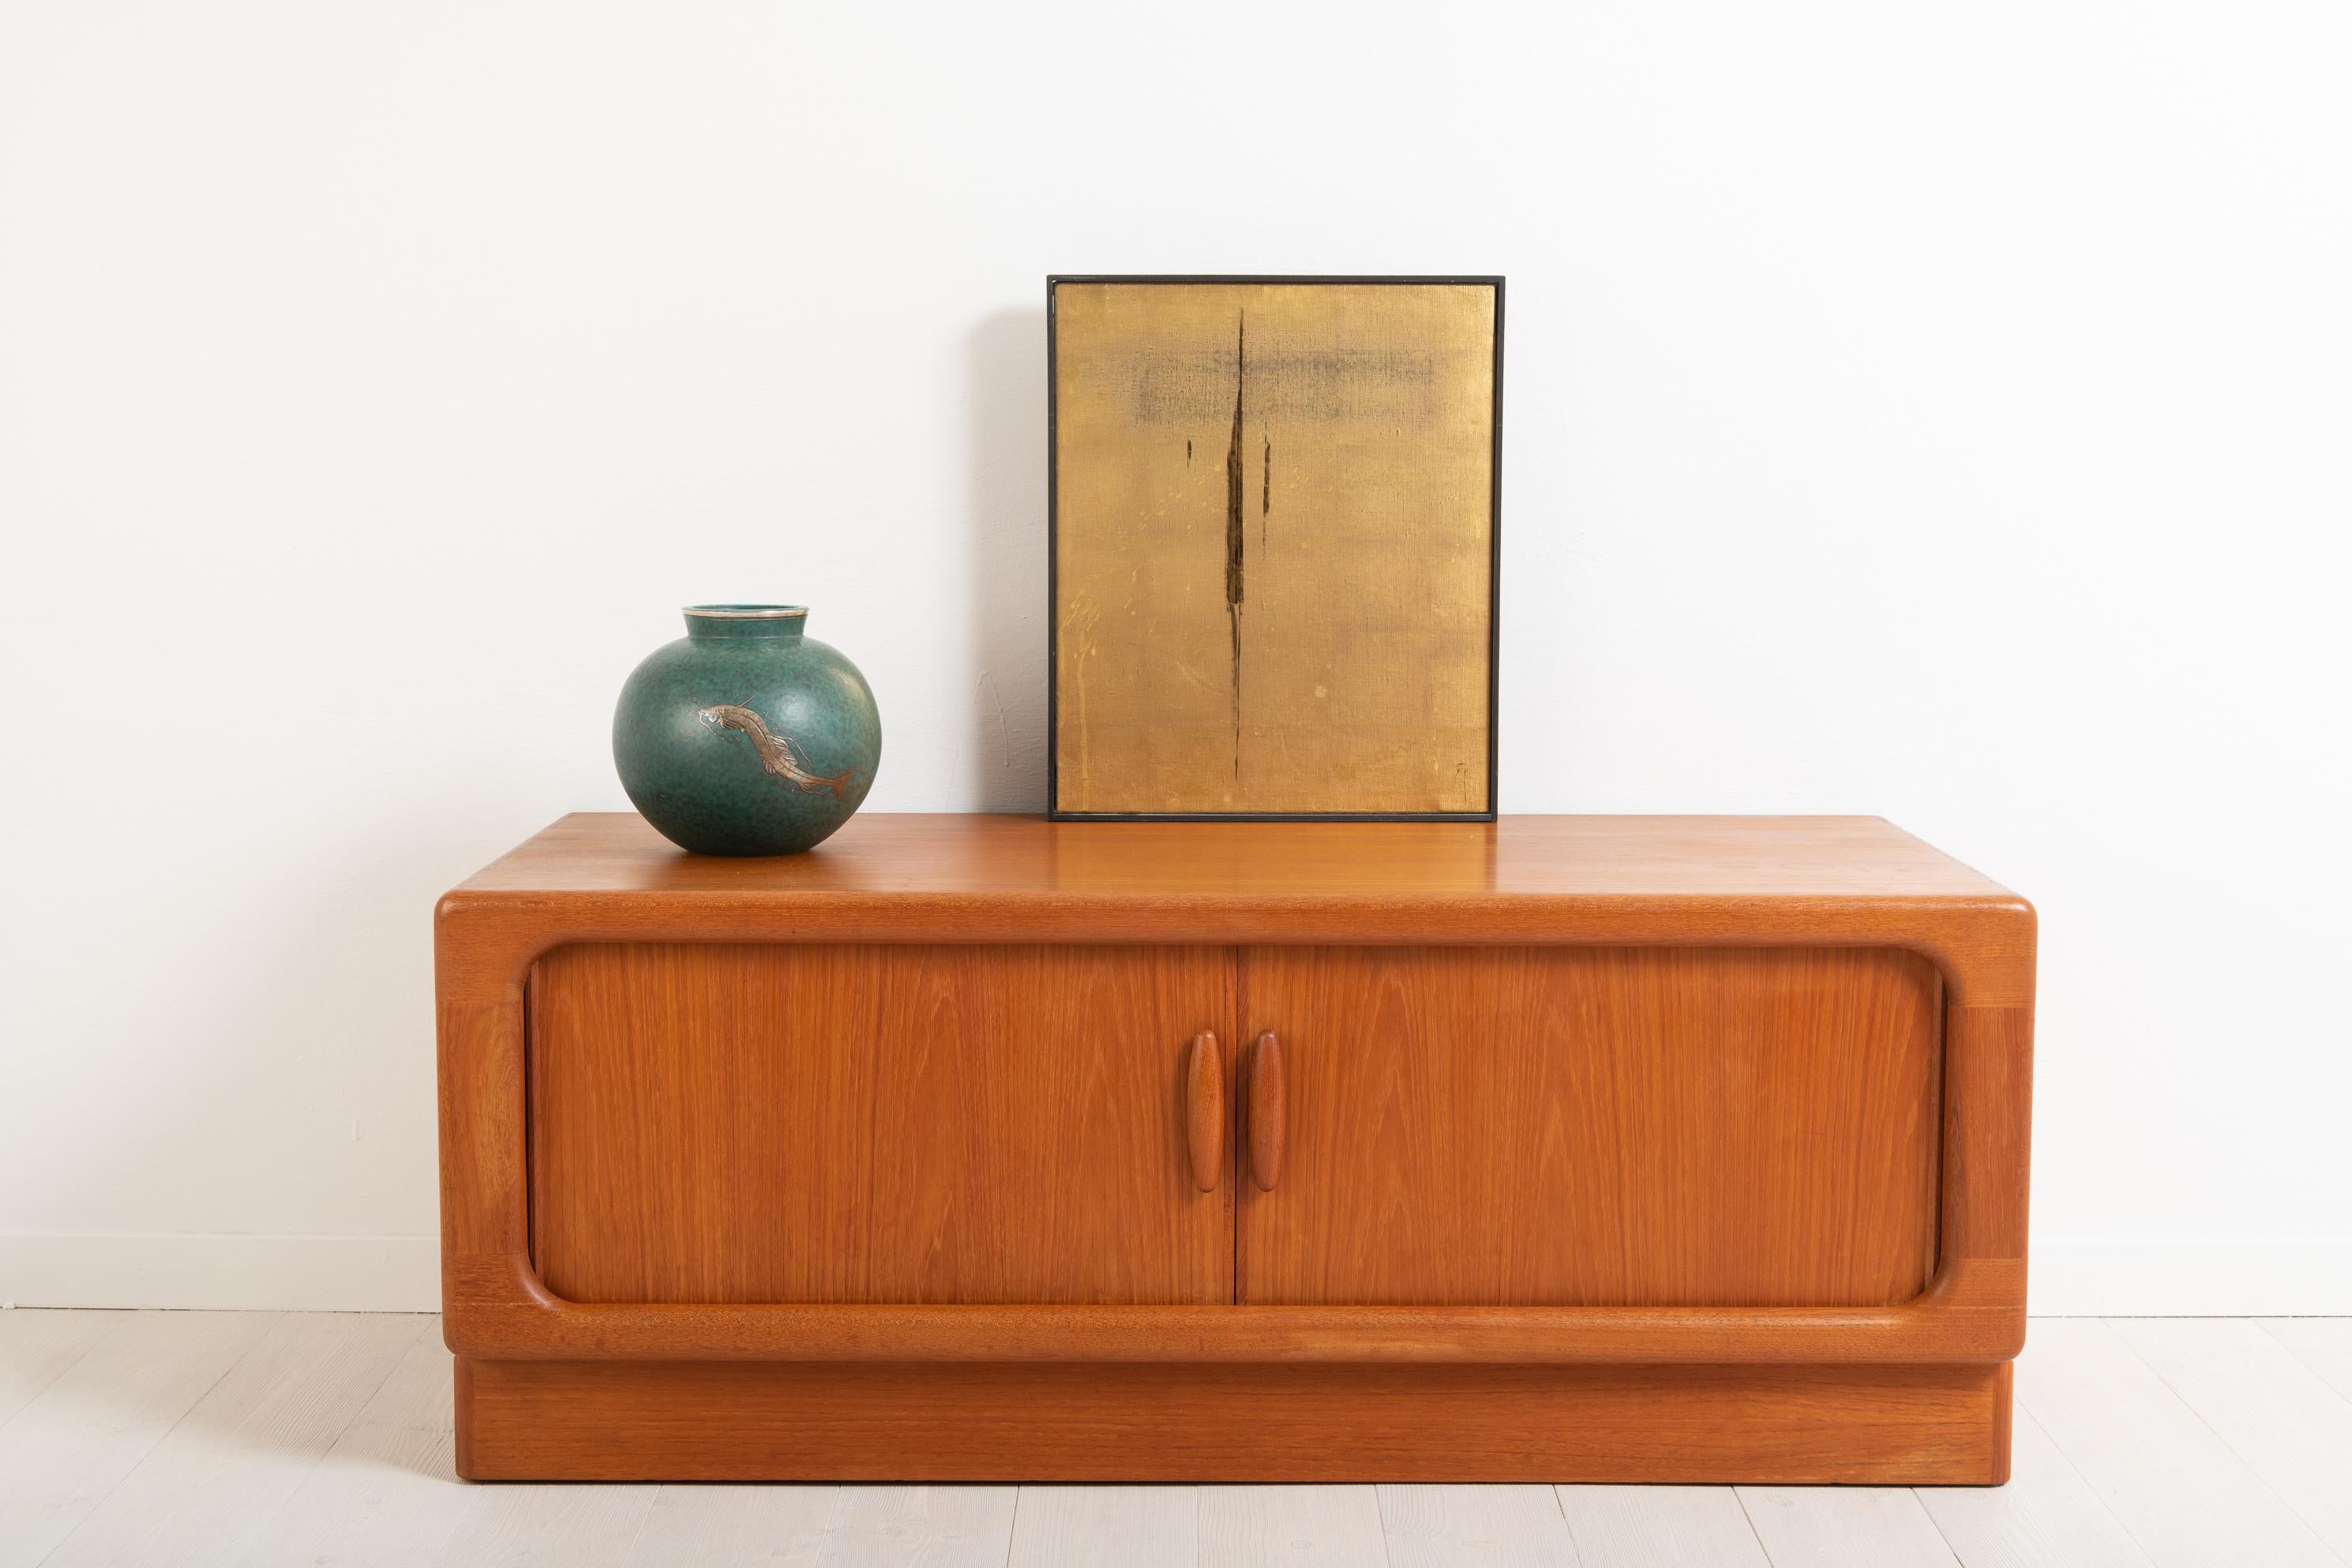 Sideboard in teak made by Dyrlund in Denmark. 1960s sliding doors. The sideboard is made from teal and marked with a label. Good vintage condition consistent with age and use. Minor traces of wear.